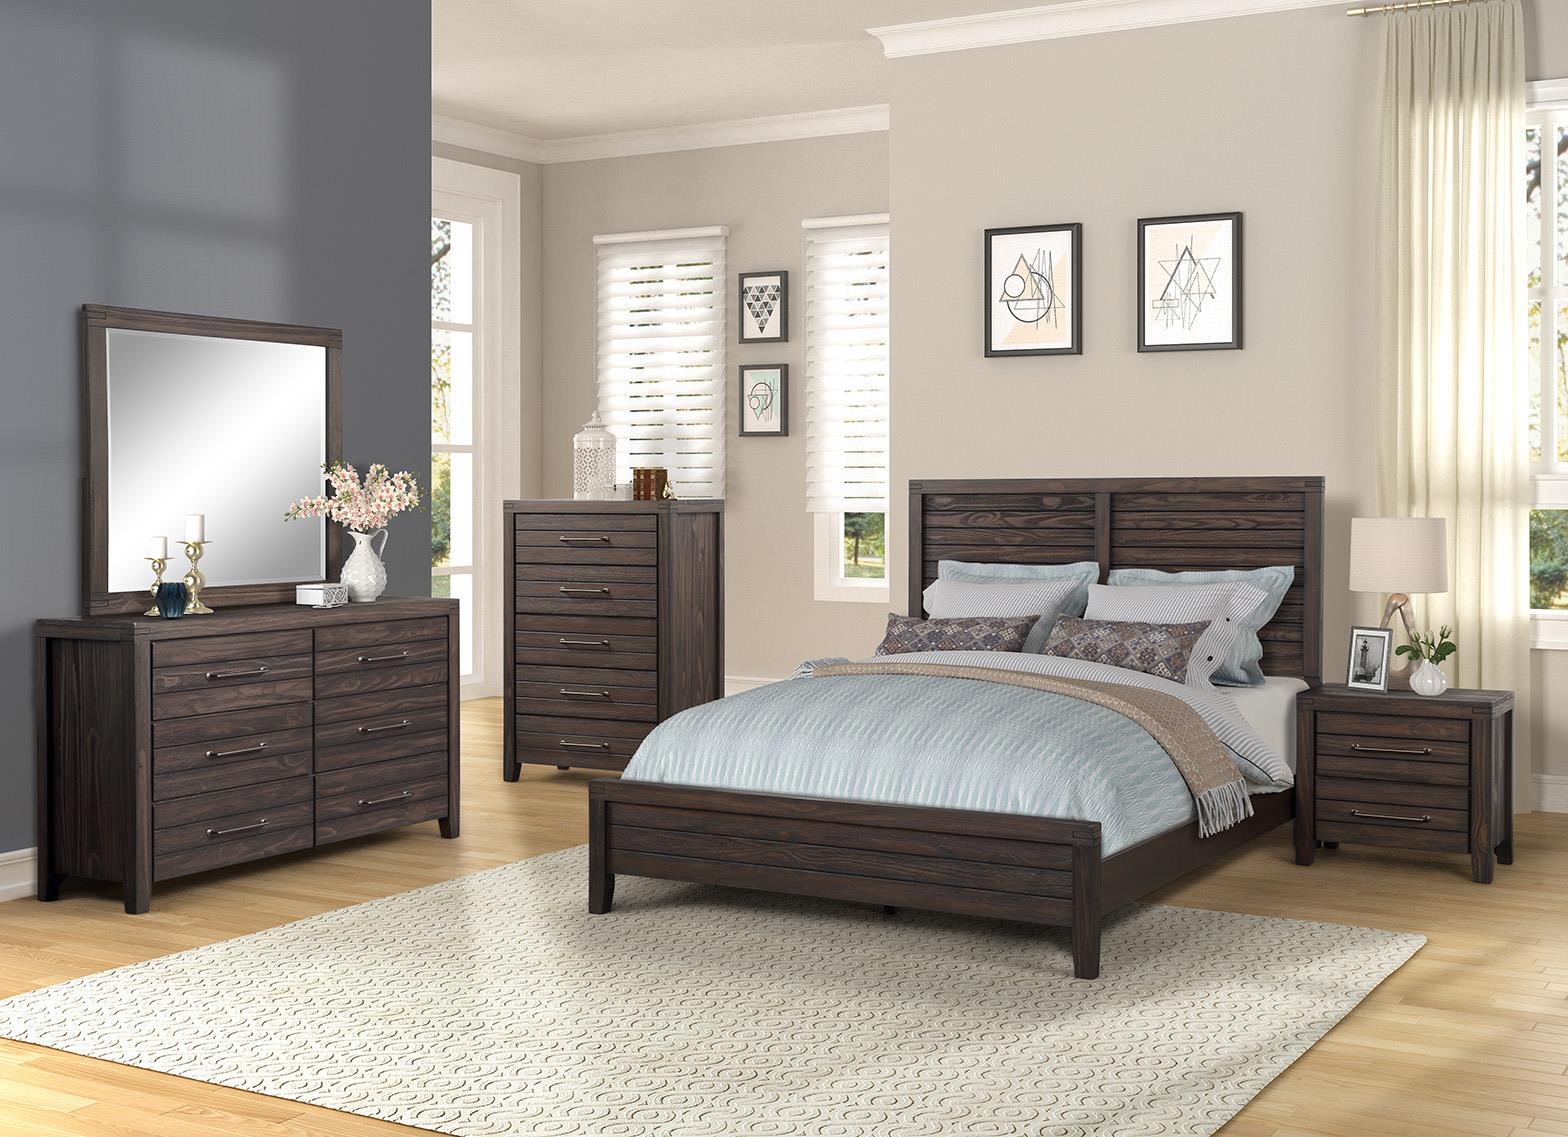 Contemporary, Traditional Panel Bedroom Set CRESTWOOD 1465-110-Set 1465-110-2NDMC-6PC in Auburn, Brown 